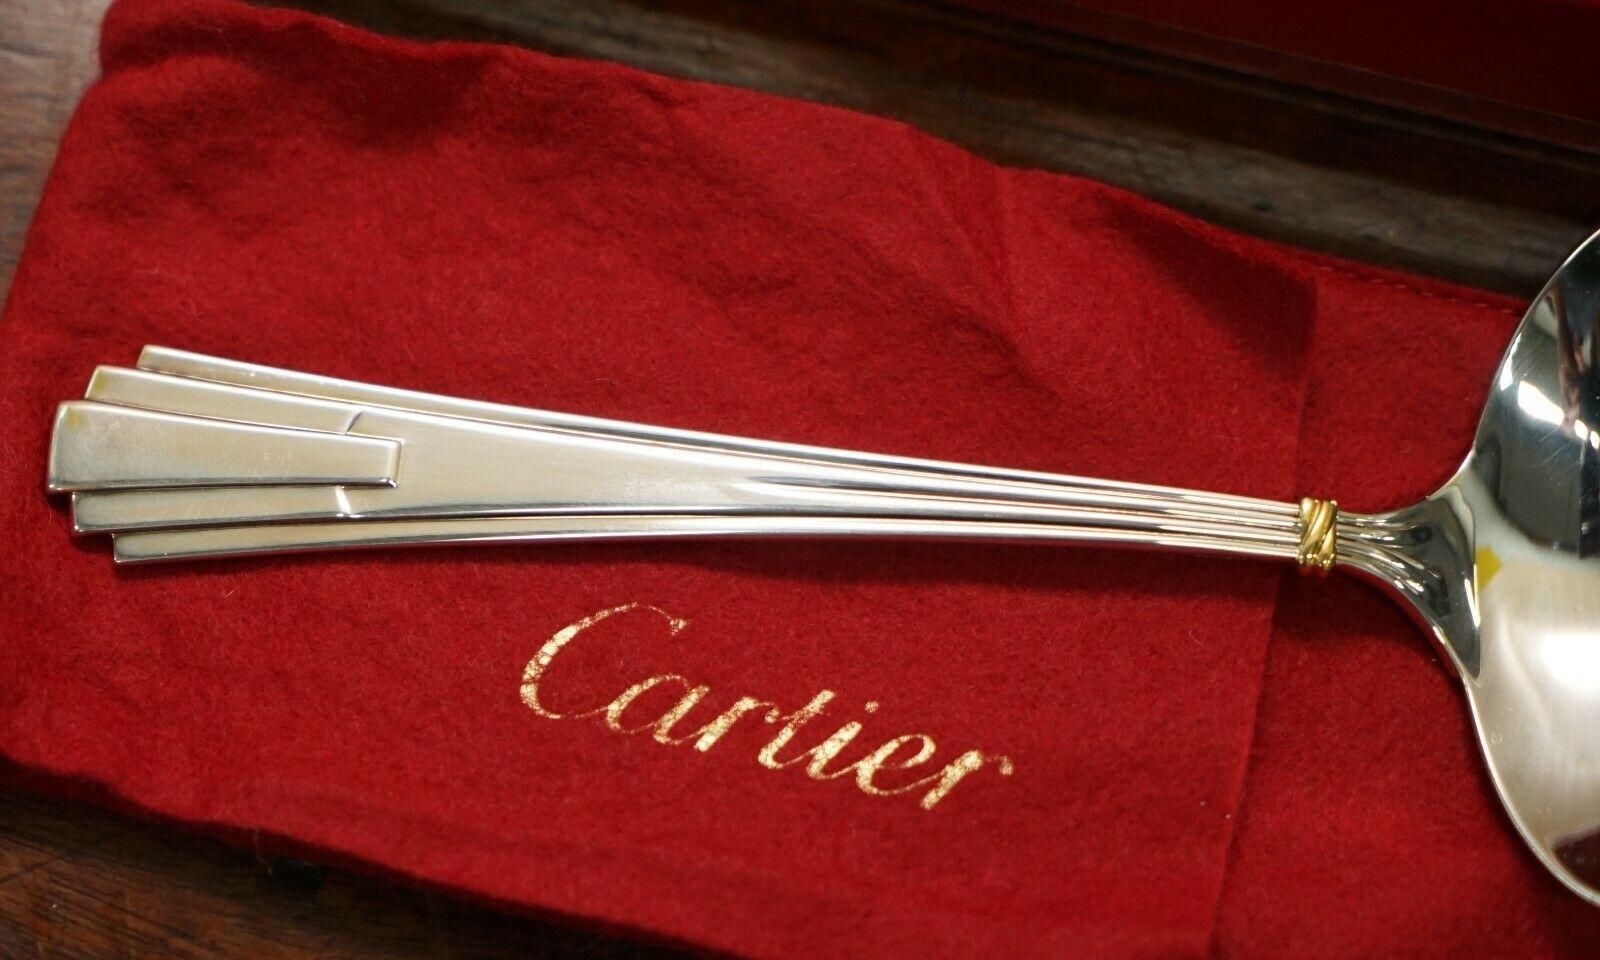 Pair of Cartier Solid Sterling Silver and Gold Gravy Ladles 1